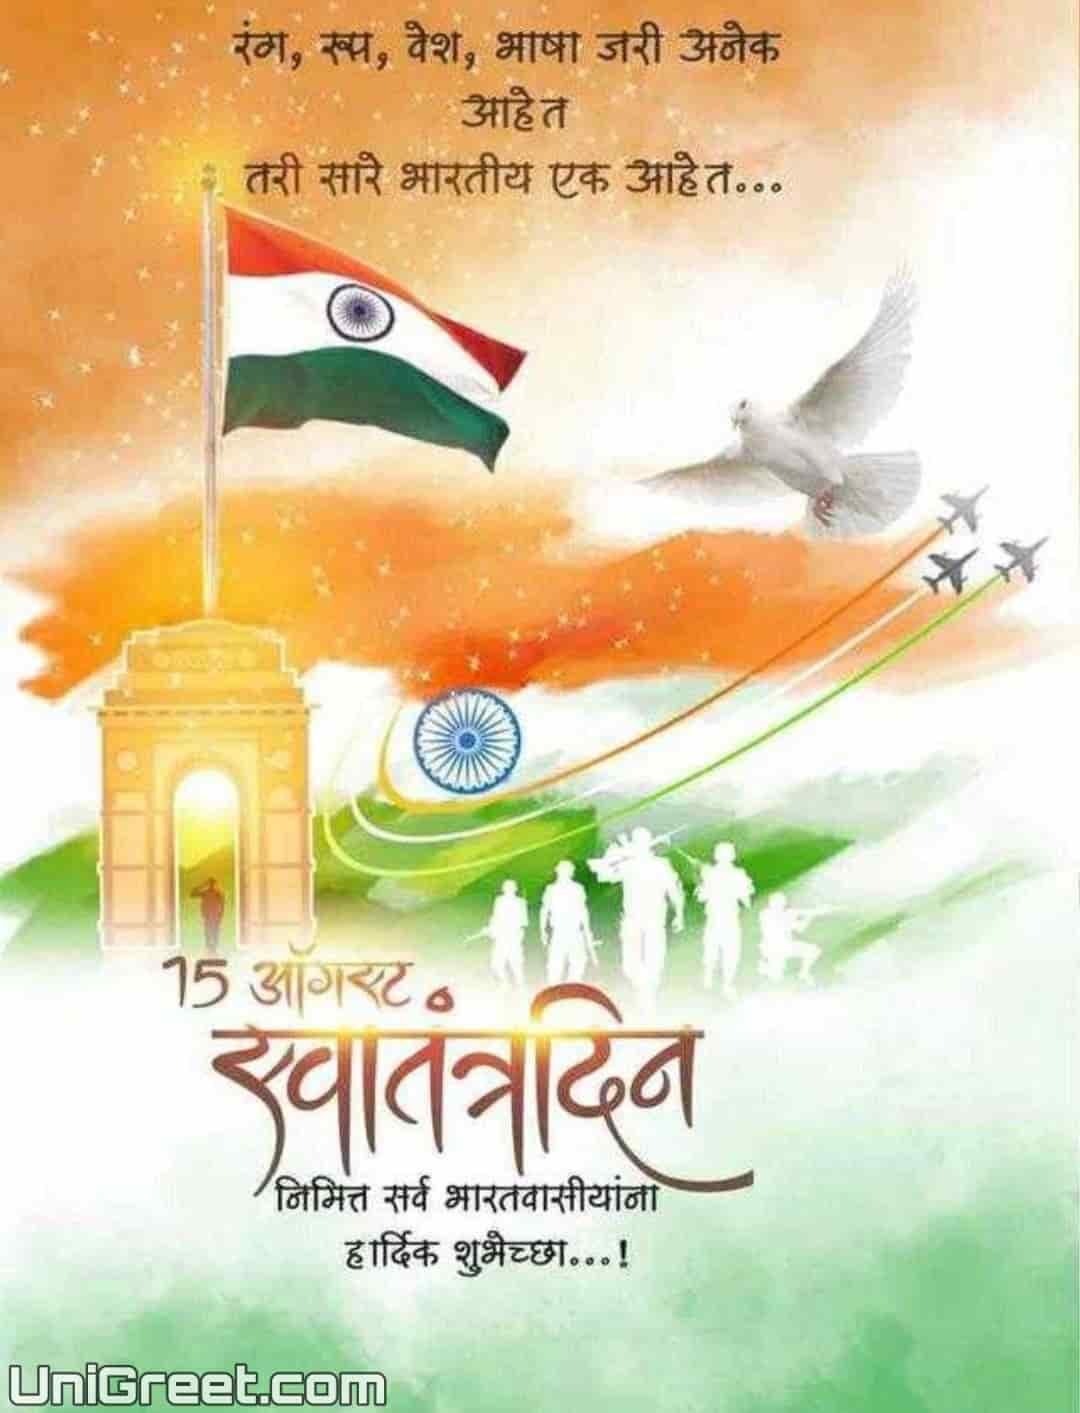 Collection of Amazing Full 4K Independence Day Images in Marathi Over